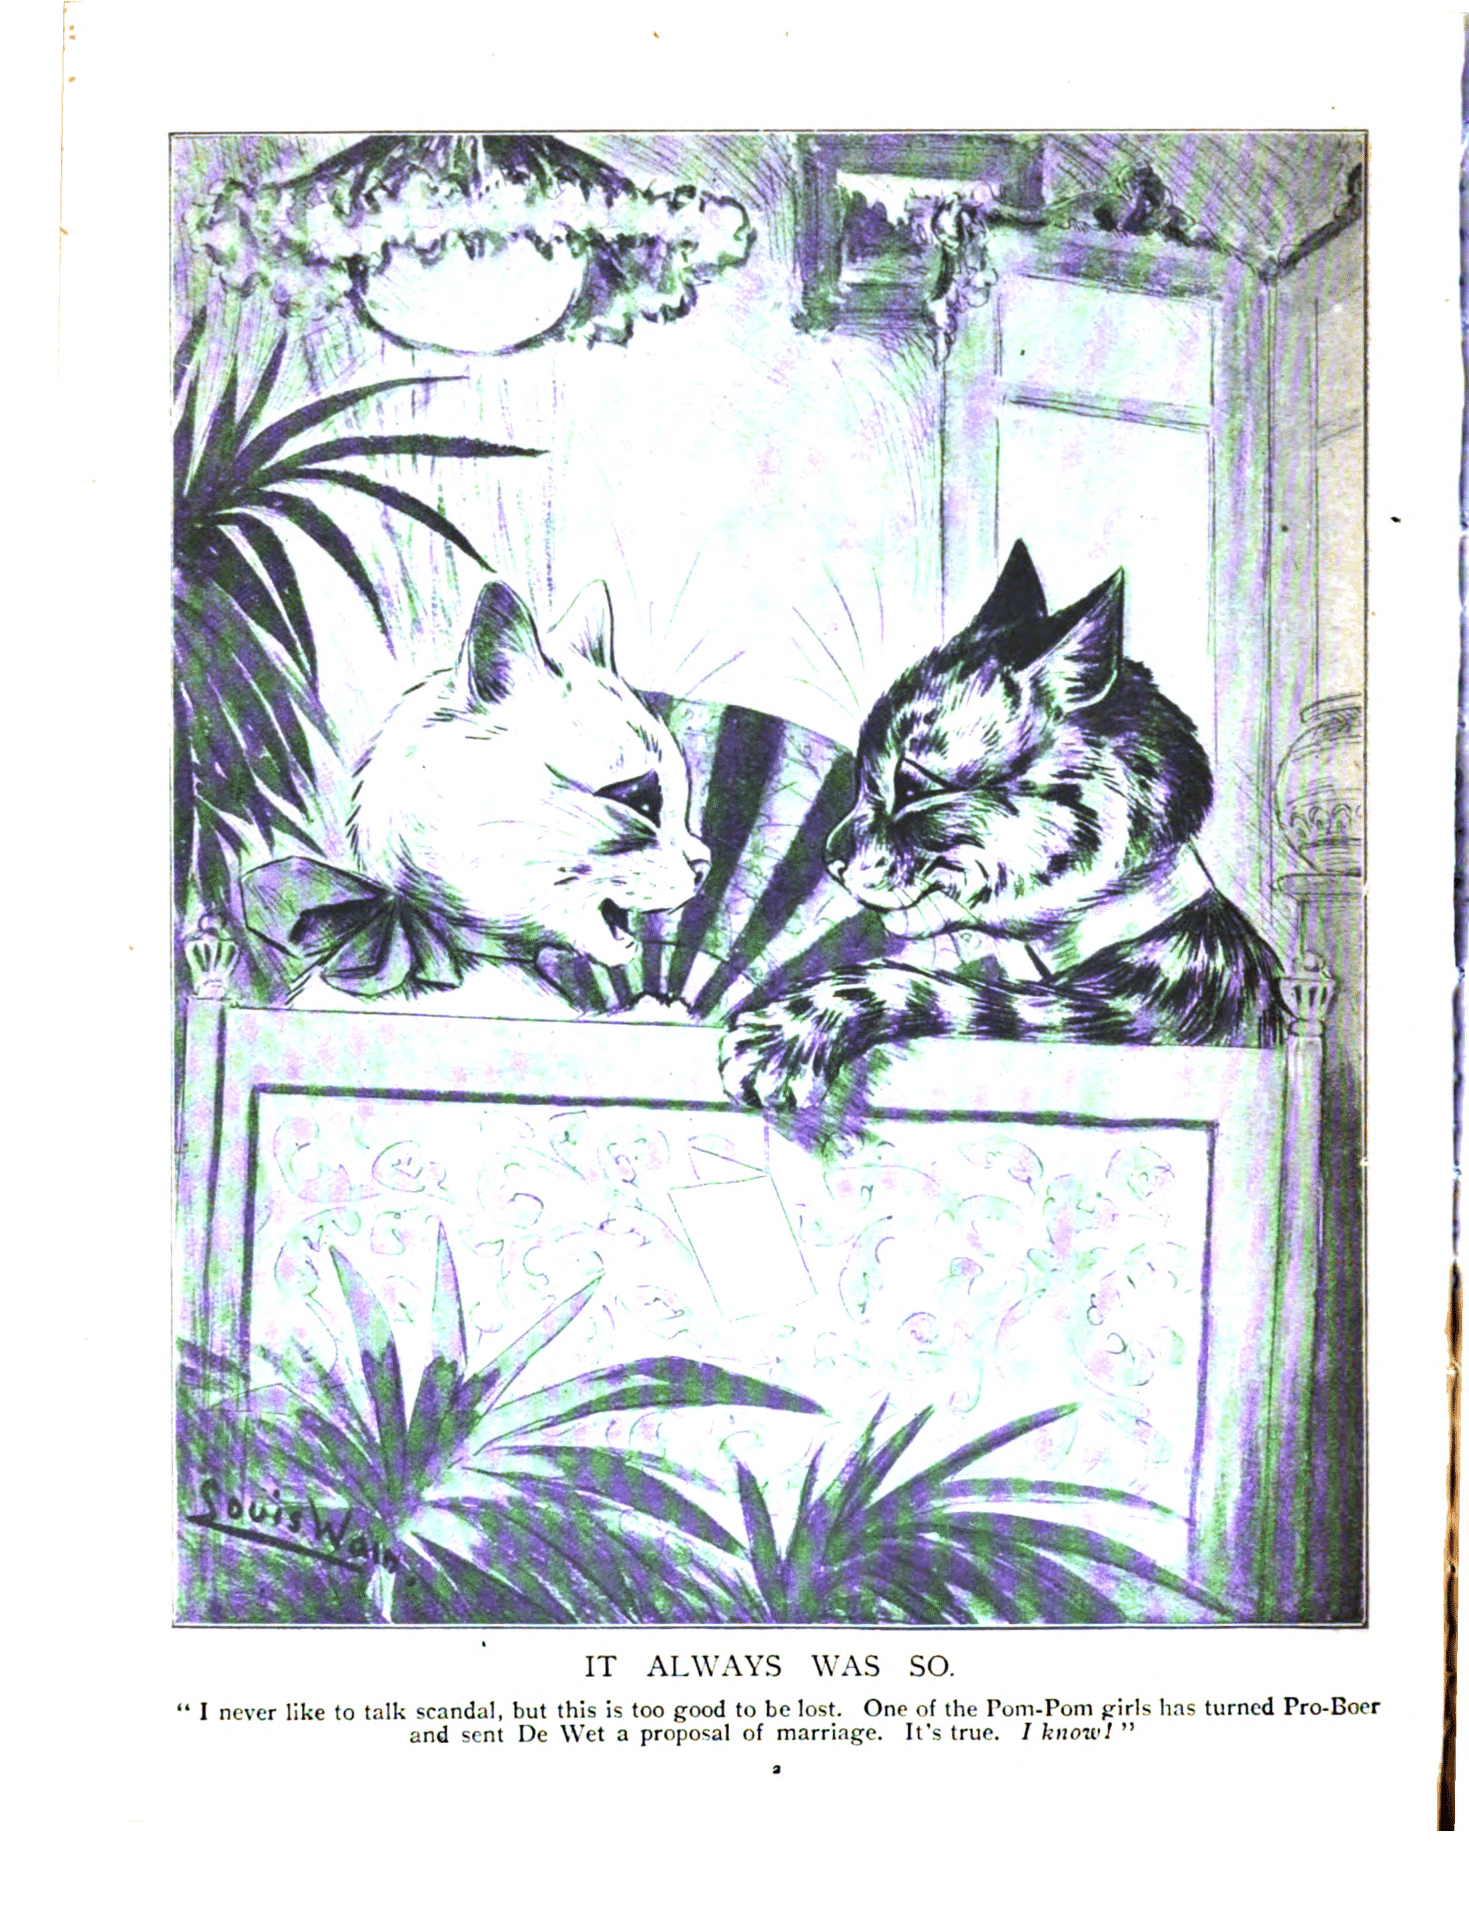 Louis Wain illustration with: 1902, 2subjects, black_and_white, book, book:annual, caption, cat, cat:tabby, clothes:bowtie, color:white, folding_fan, humanised, indoors, meta:scan_artifact, profile, signature, subject:marriage